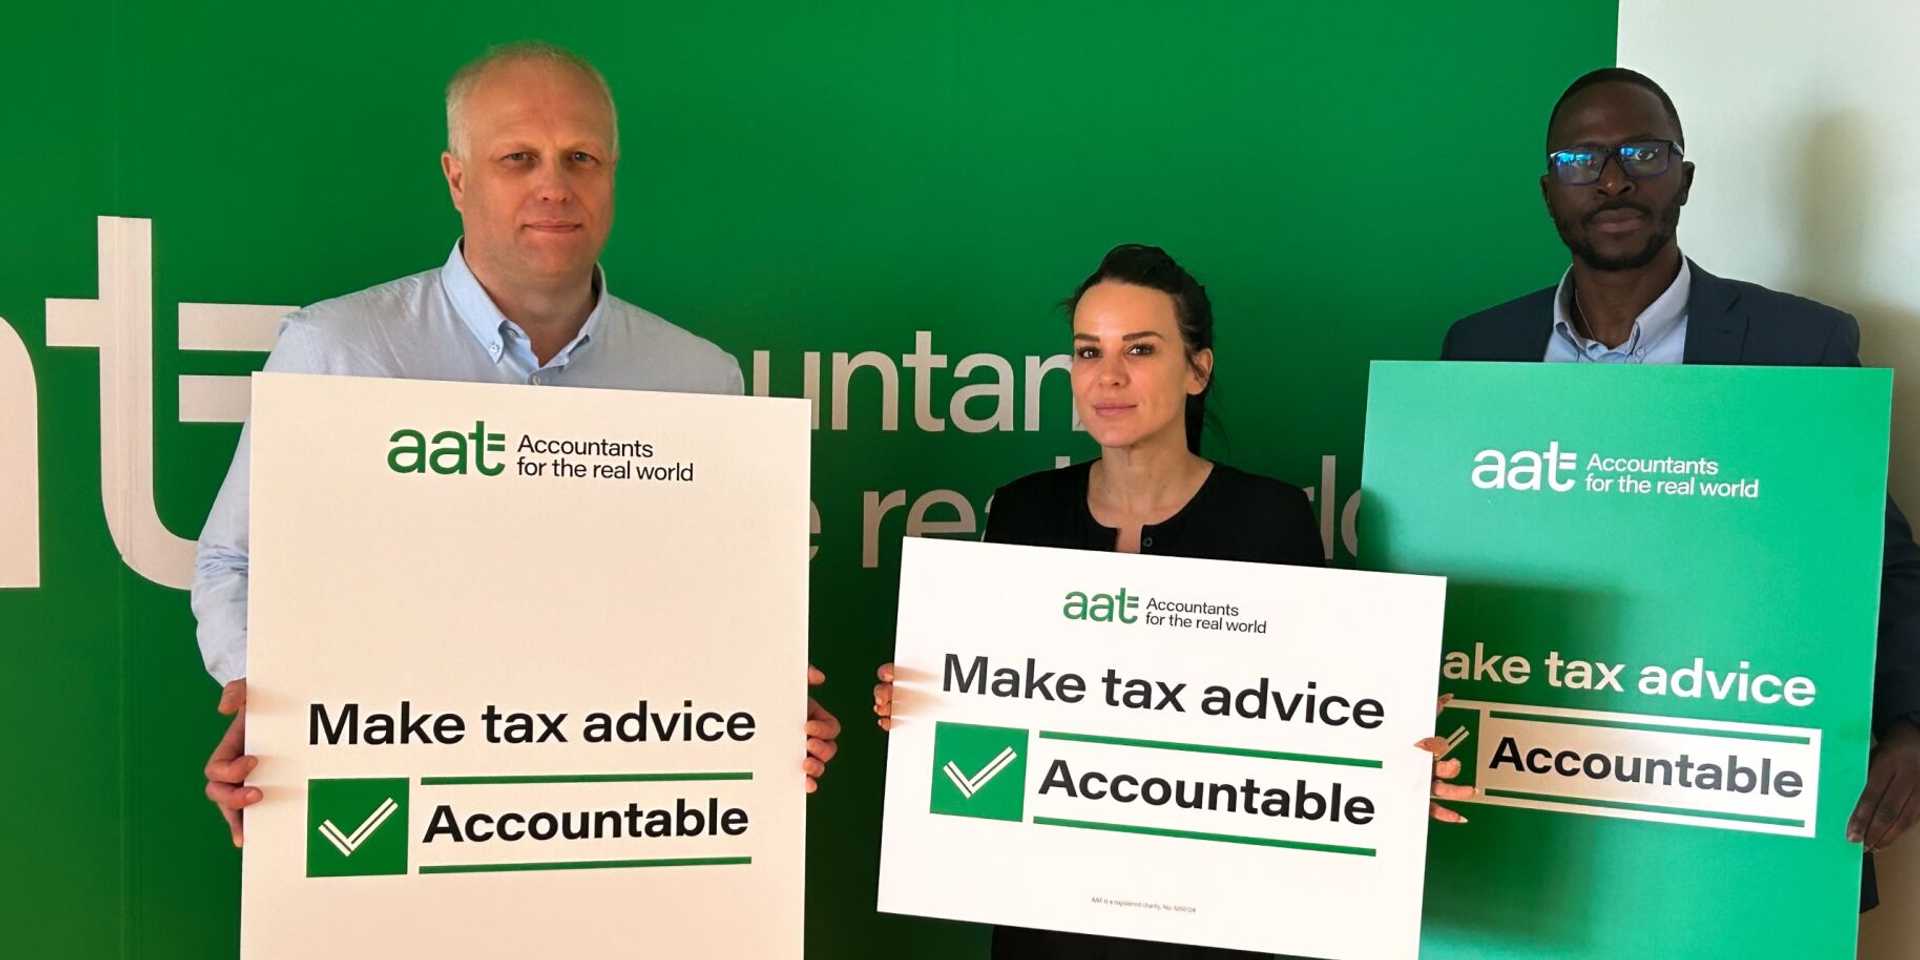 Three people holding up "Make Tax Advice Accountable" sign in front of a green wall with the AAT logo.